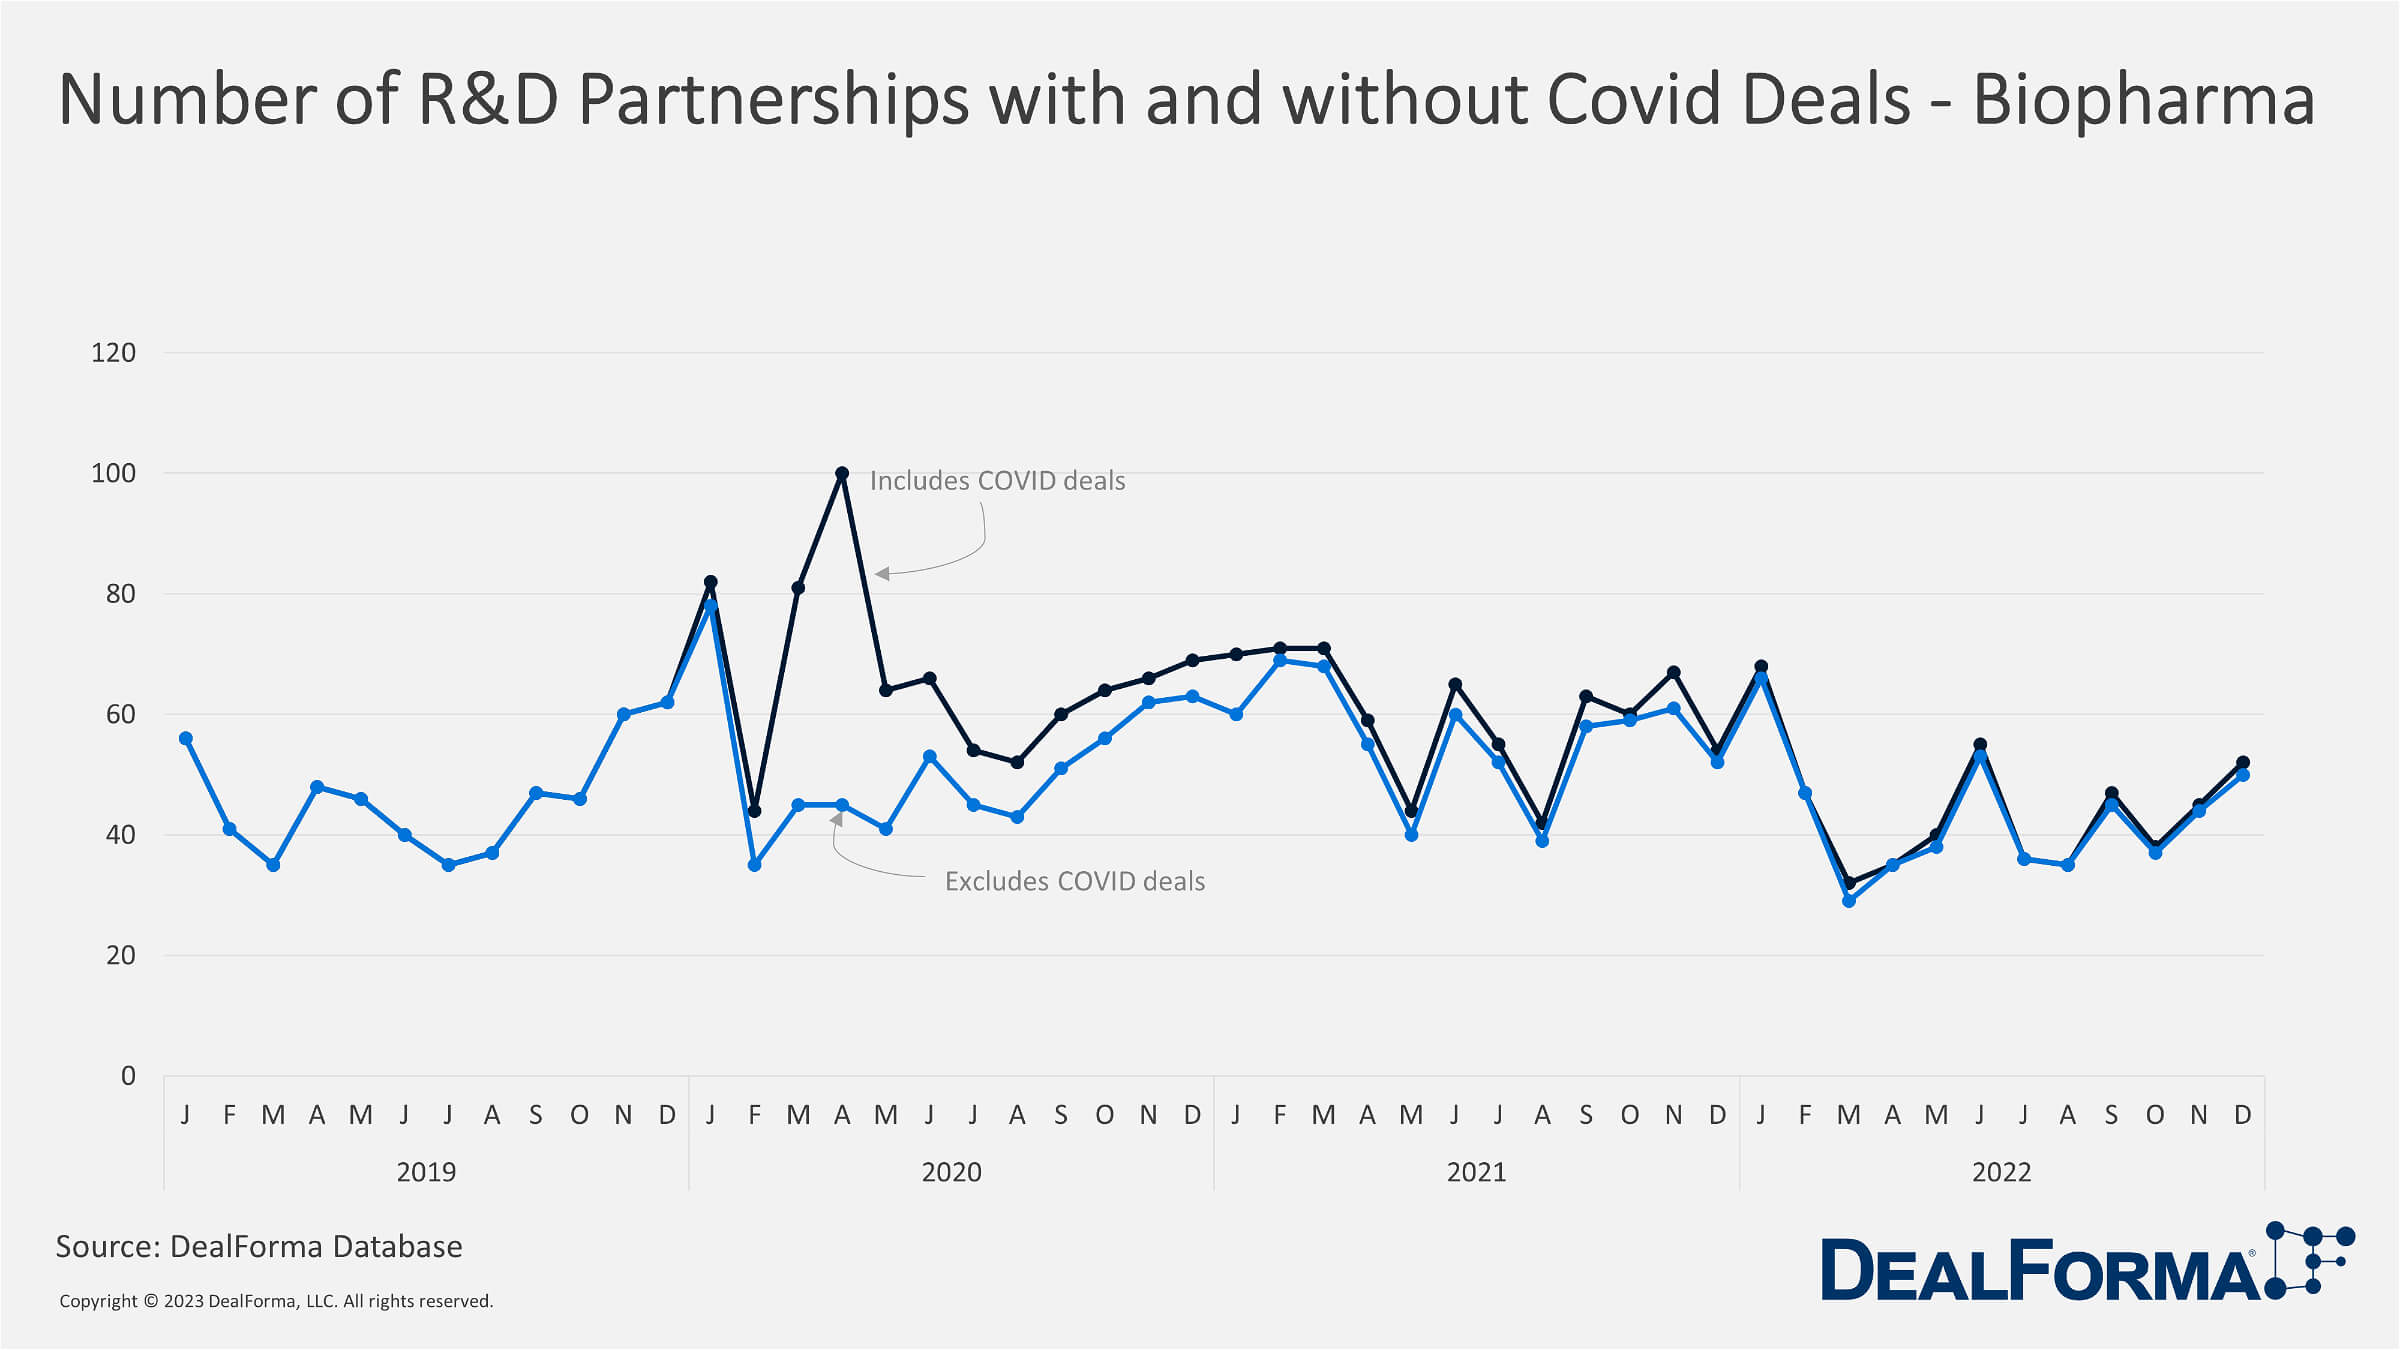 Number of Partnerships